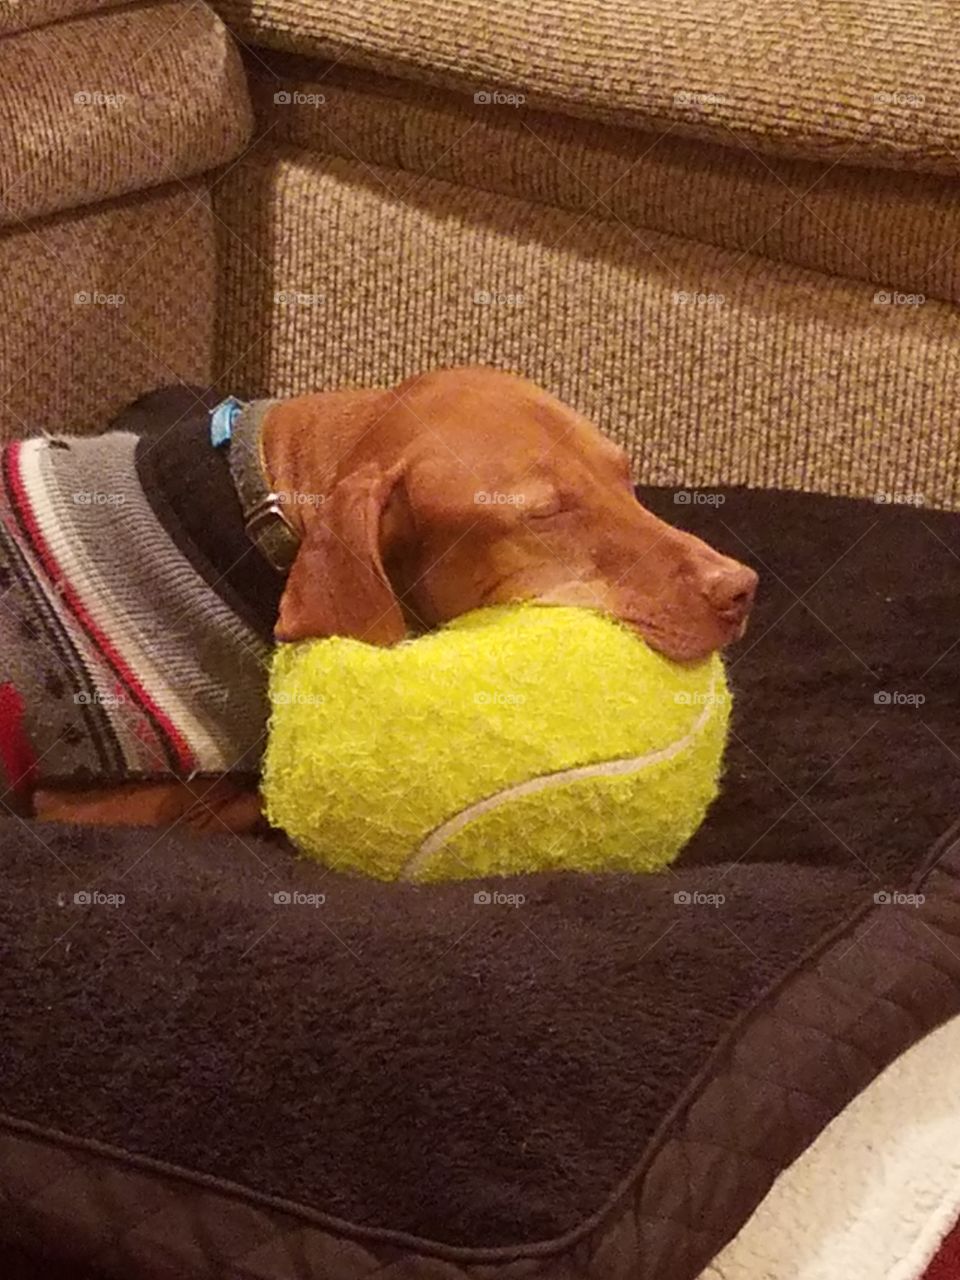 Toby sleeping on his favorite ball